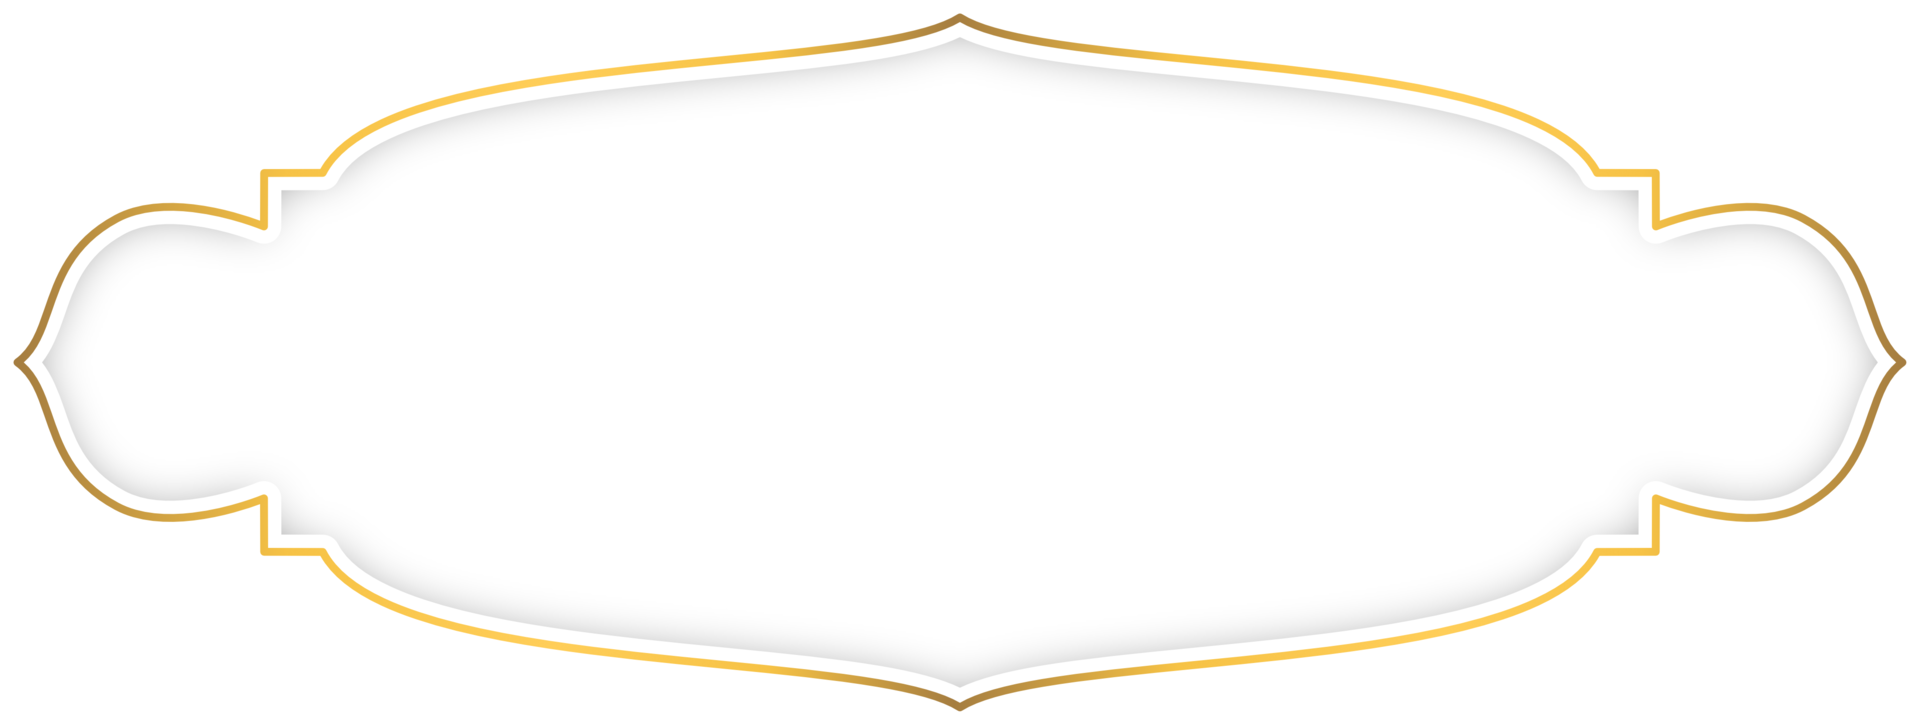 White and gold label frame border banner with shadow png